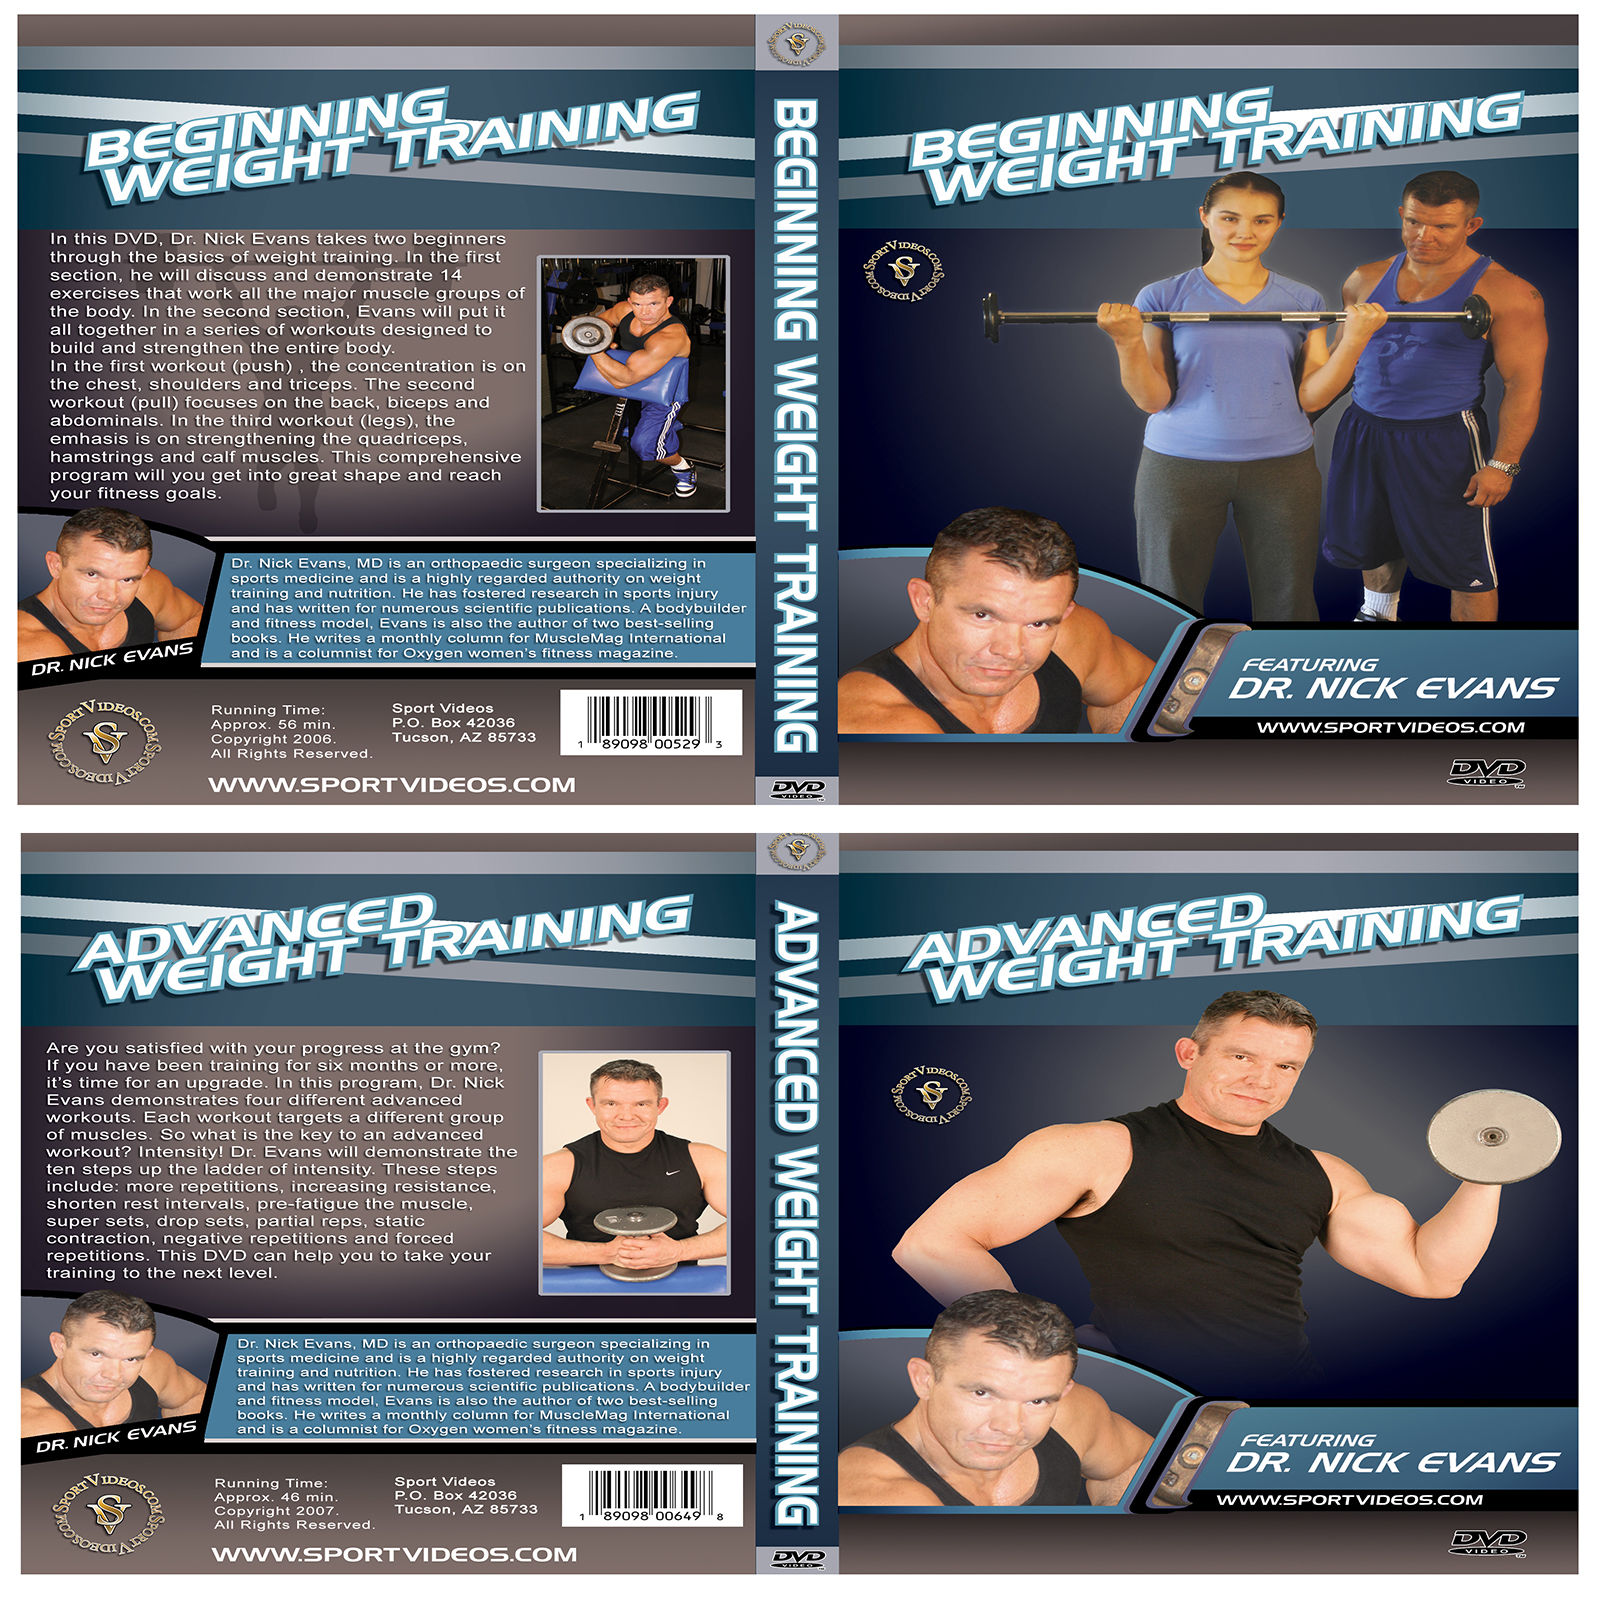 Weight Training 2 DVD Set or Video Download  - Free Shipping